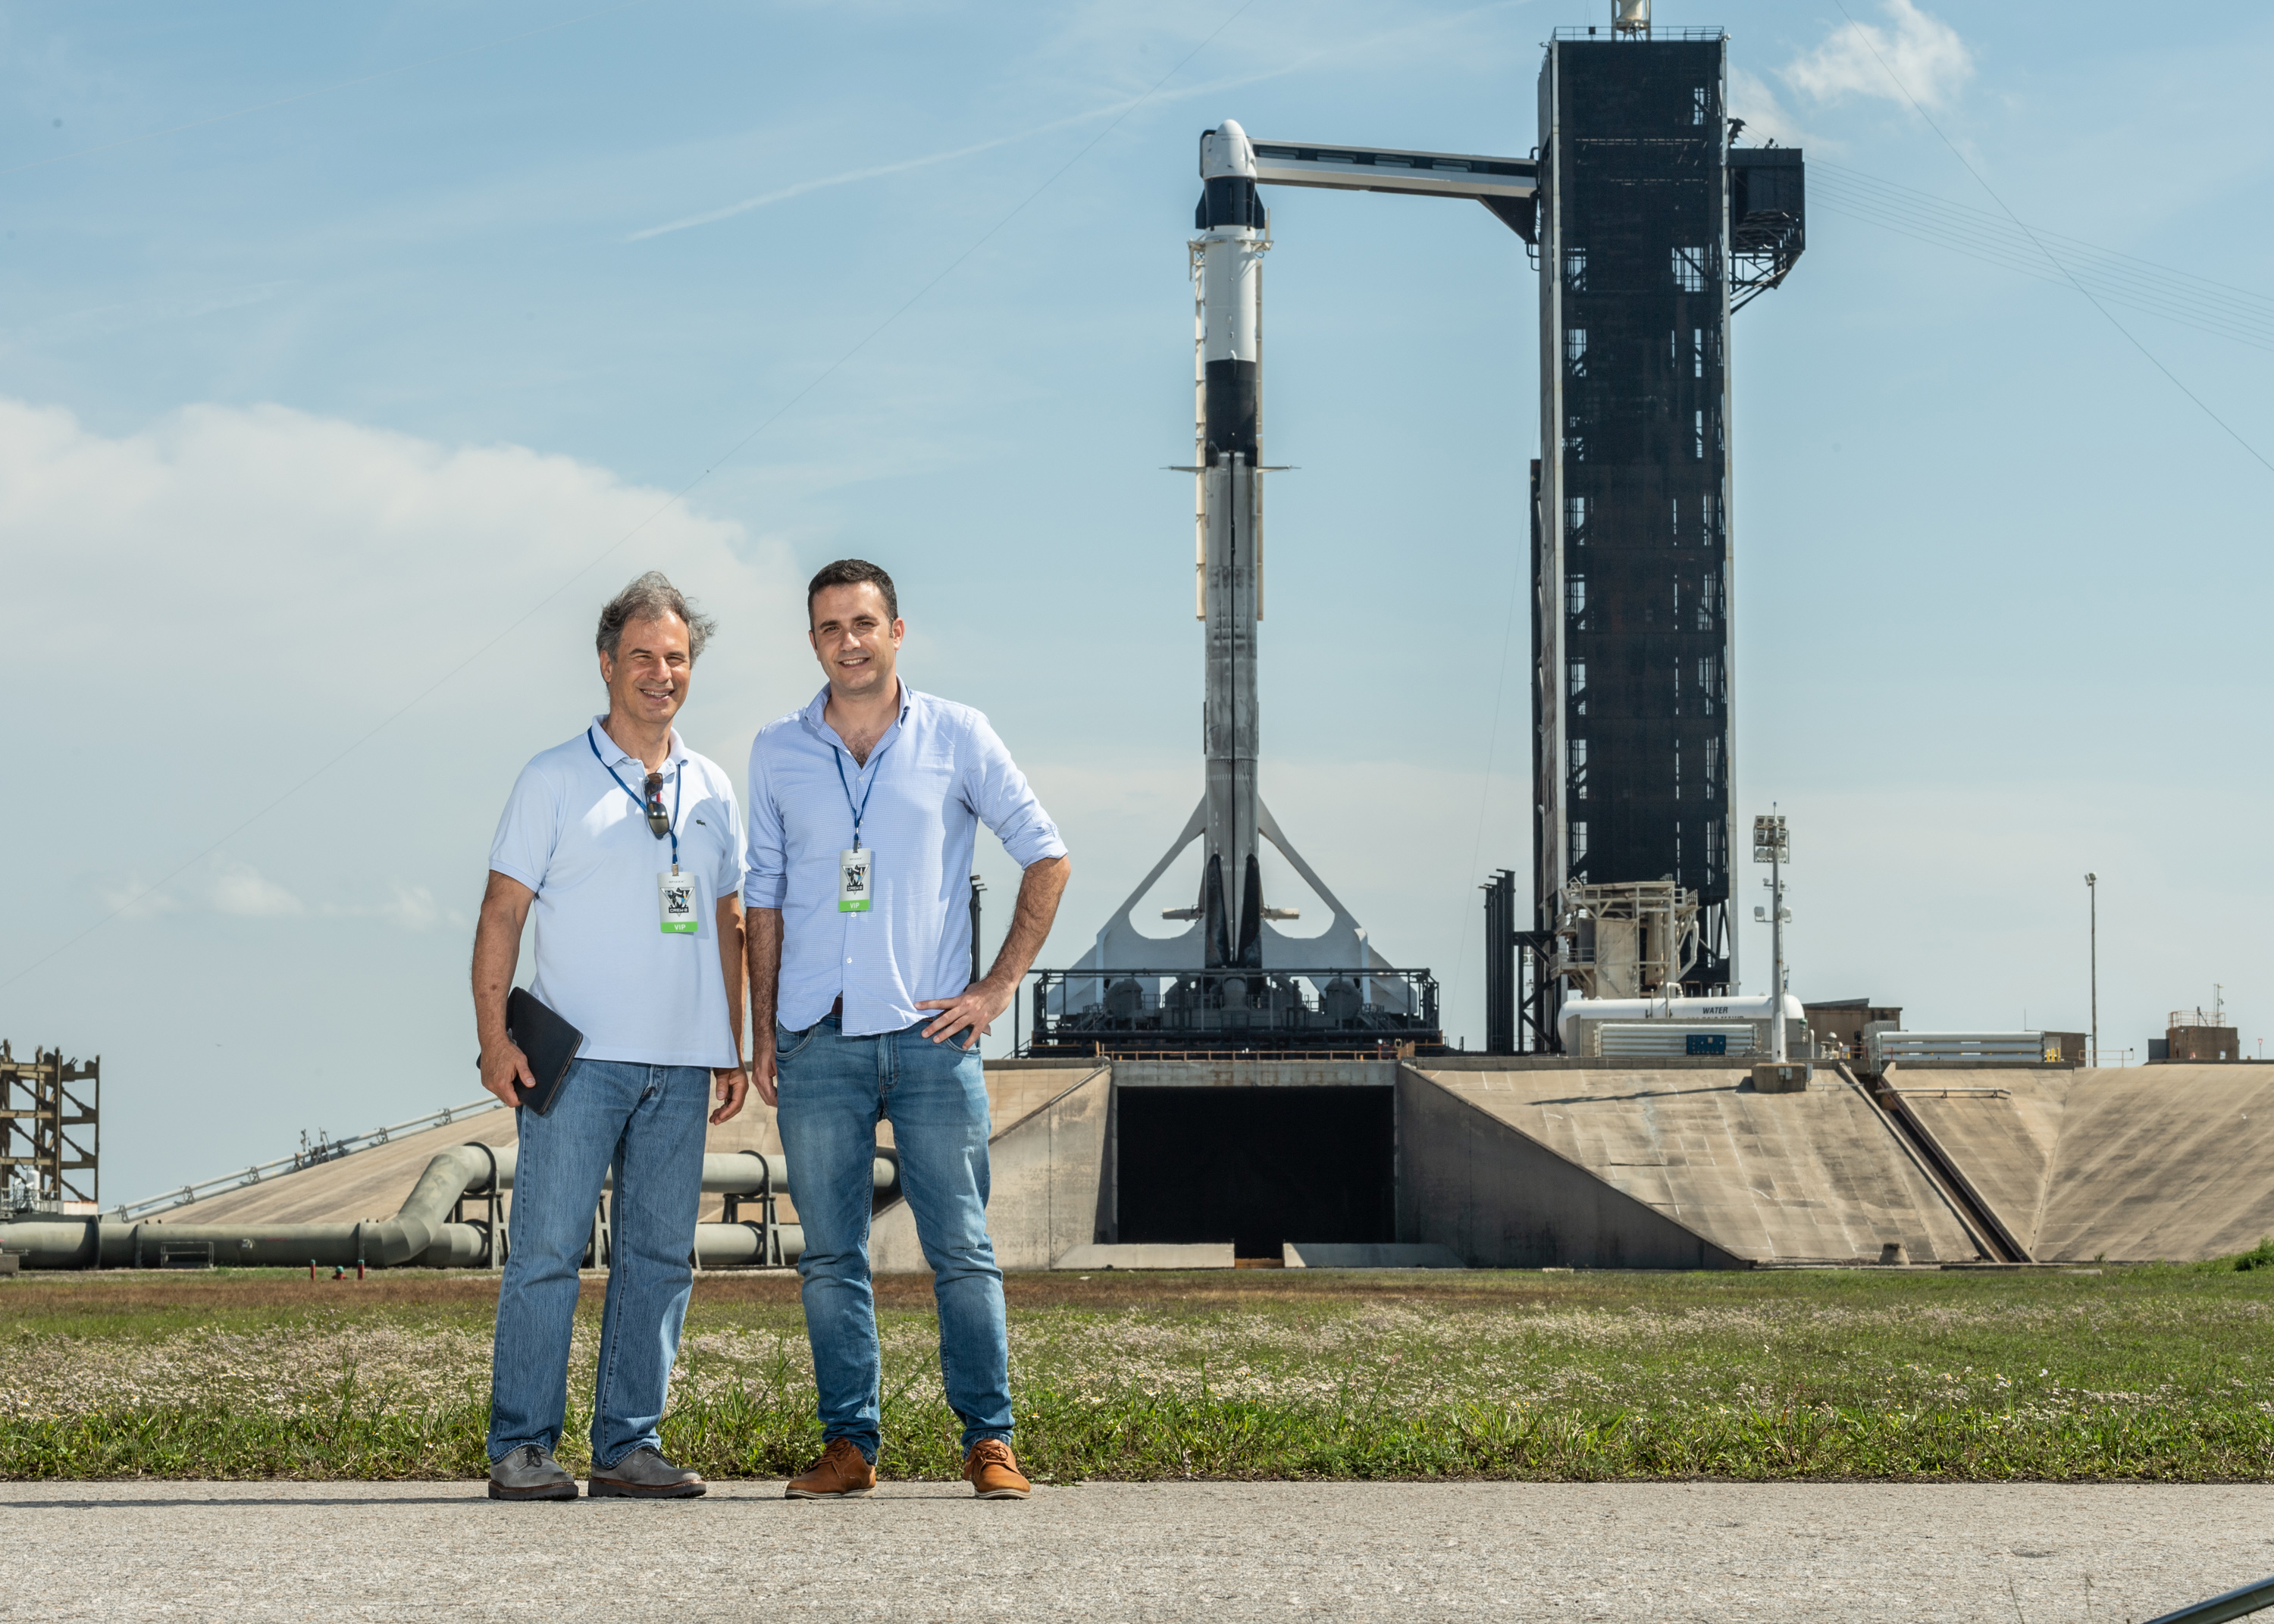 Ax-1 astronaut Eytan Stibbe (left) and Ramon Foundation Director General Ran Live stand near the SpaceX Falcon 9 rocket and Dragon capsule that will carry the Ax-1 mission on April 8, 2022 Pad 39A of the Kennedy Space Center will launch.